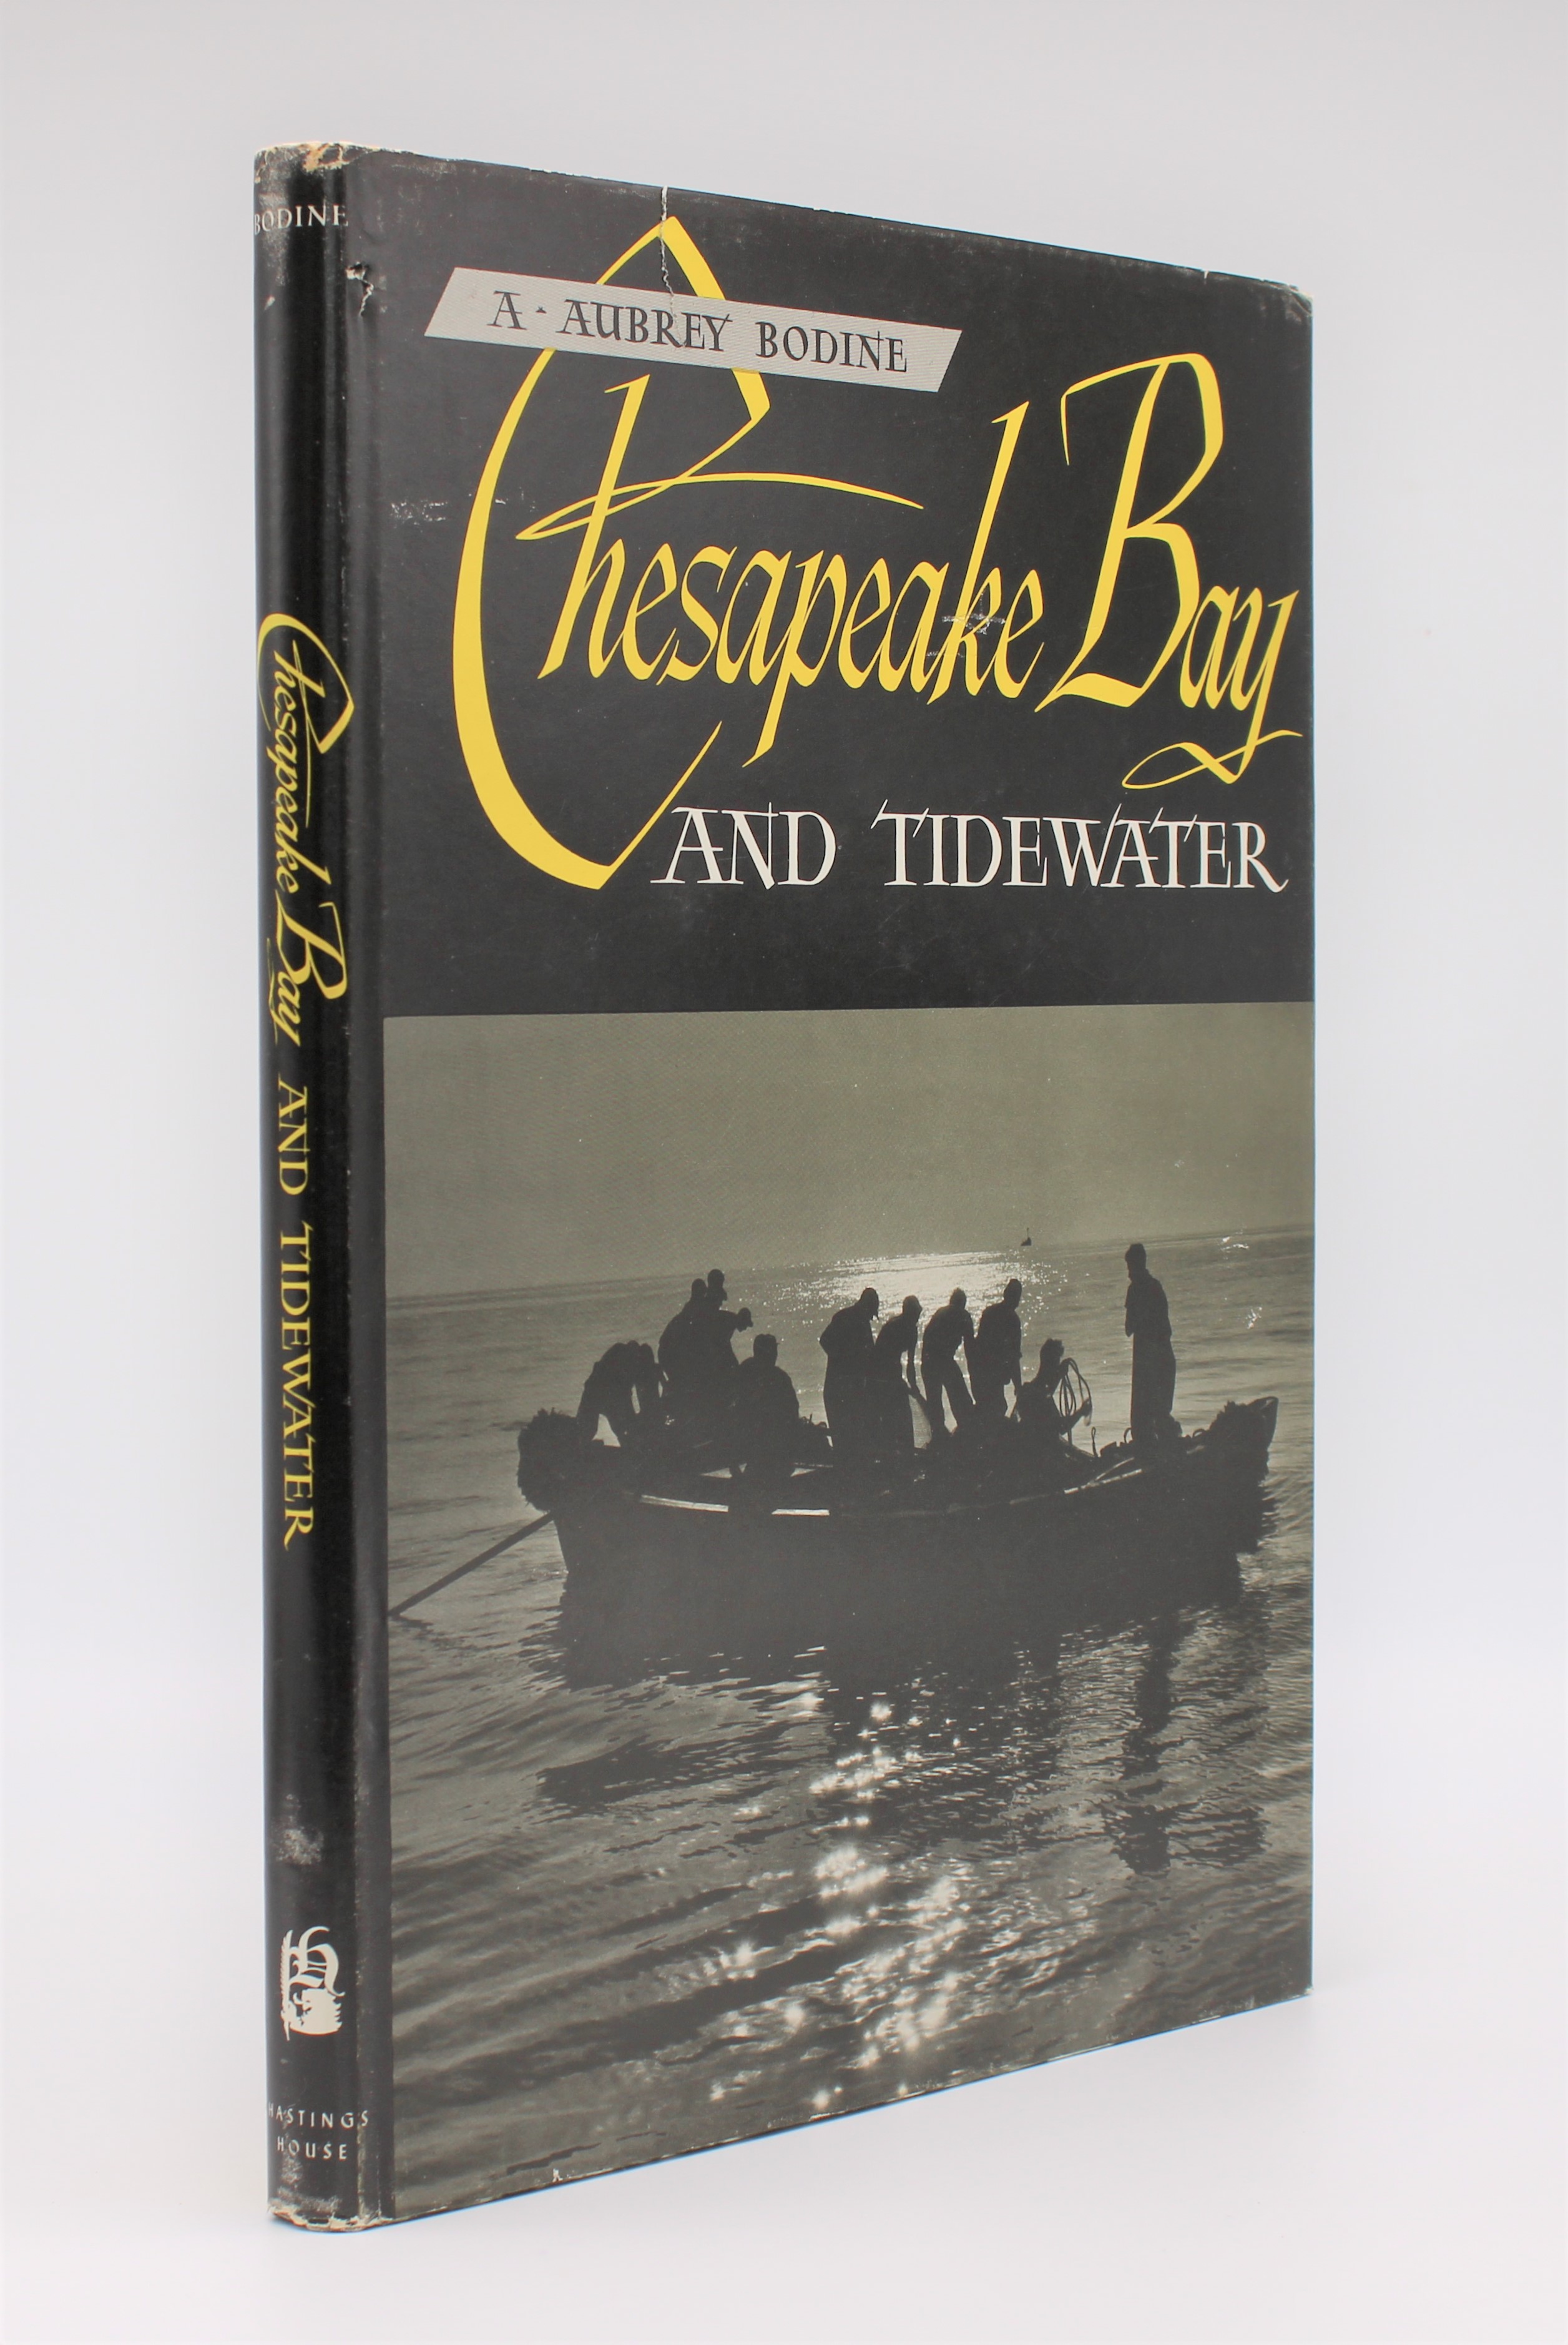 CHESAPEAKE BAY AND TIDEWATER Bodine, A. Aubrey [Very Good] [Hardcover] 144 pages. Map endpapers. A book of superb black and white photographs by A. Aubrey Bodine, award-winning photographer for the Baltimore Sun newspaper. The cloth covers have a wraparound photograph of sailboats on the Chesapeake Bay. The book is clean and tight, with some minor foxing on edges of the textblock (but not on the pages). The dust jacket is clean and bright with a hint of edgewear and two closed tears on the top edge (one is 3/4 inch long; the other 3/8 inch). Size: Folio - over 12  - 15  tall